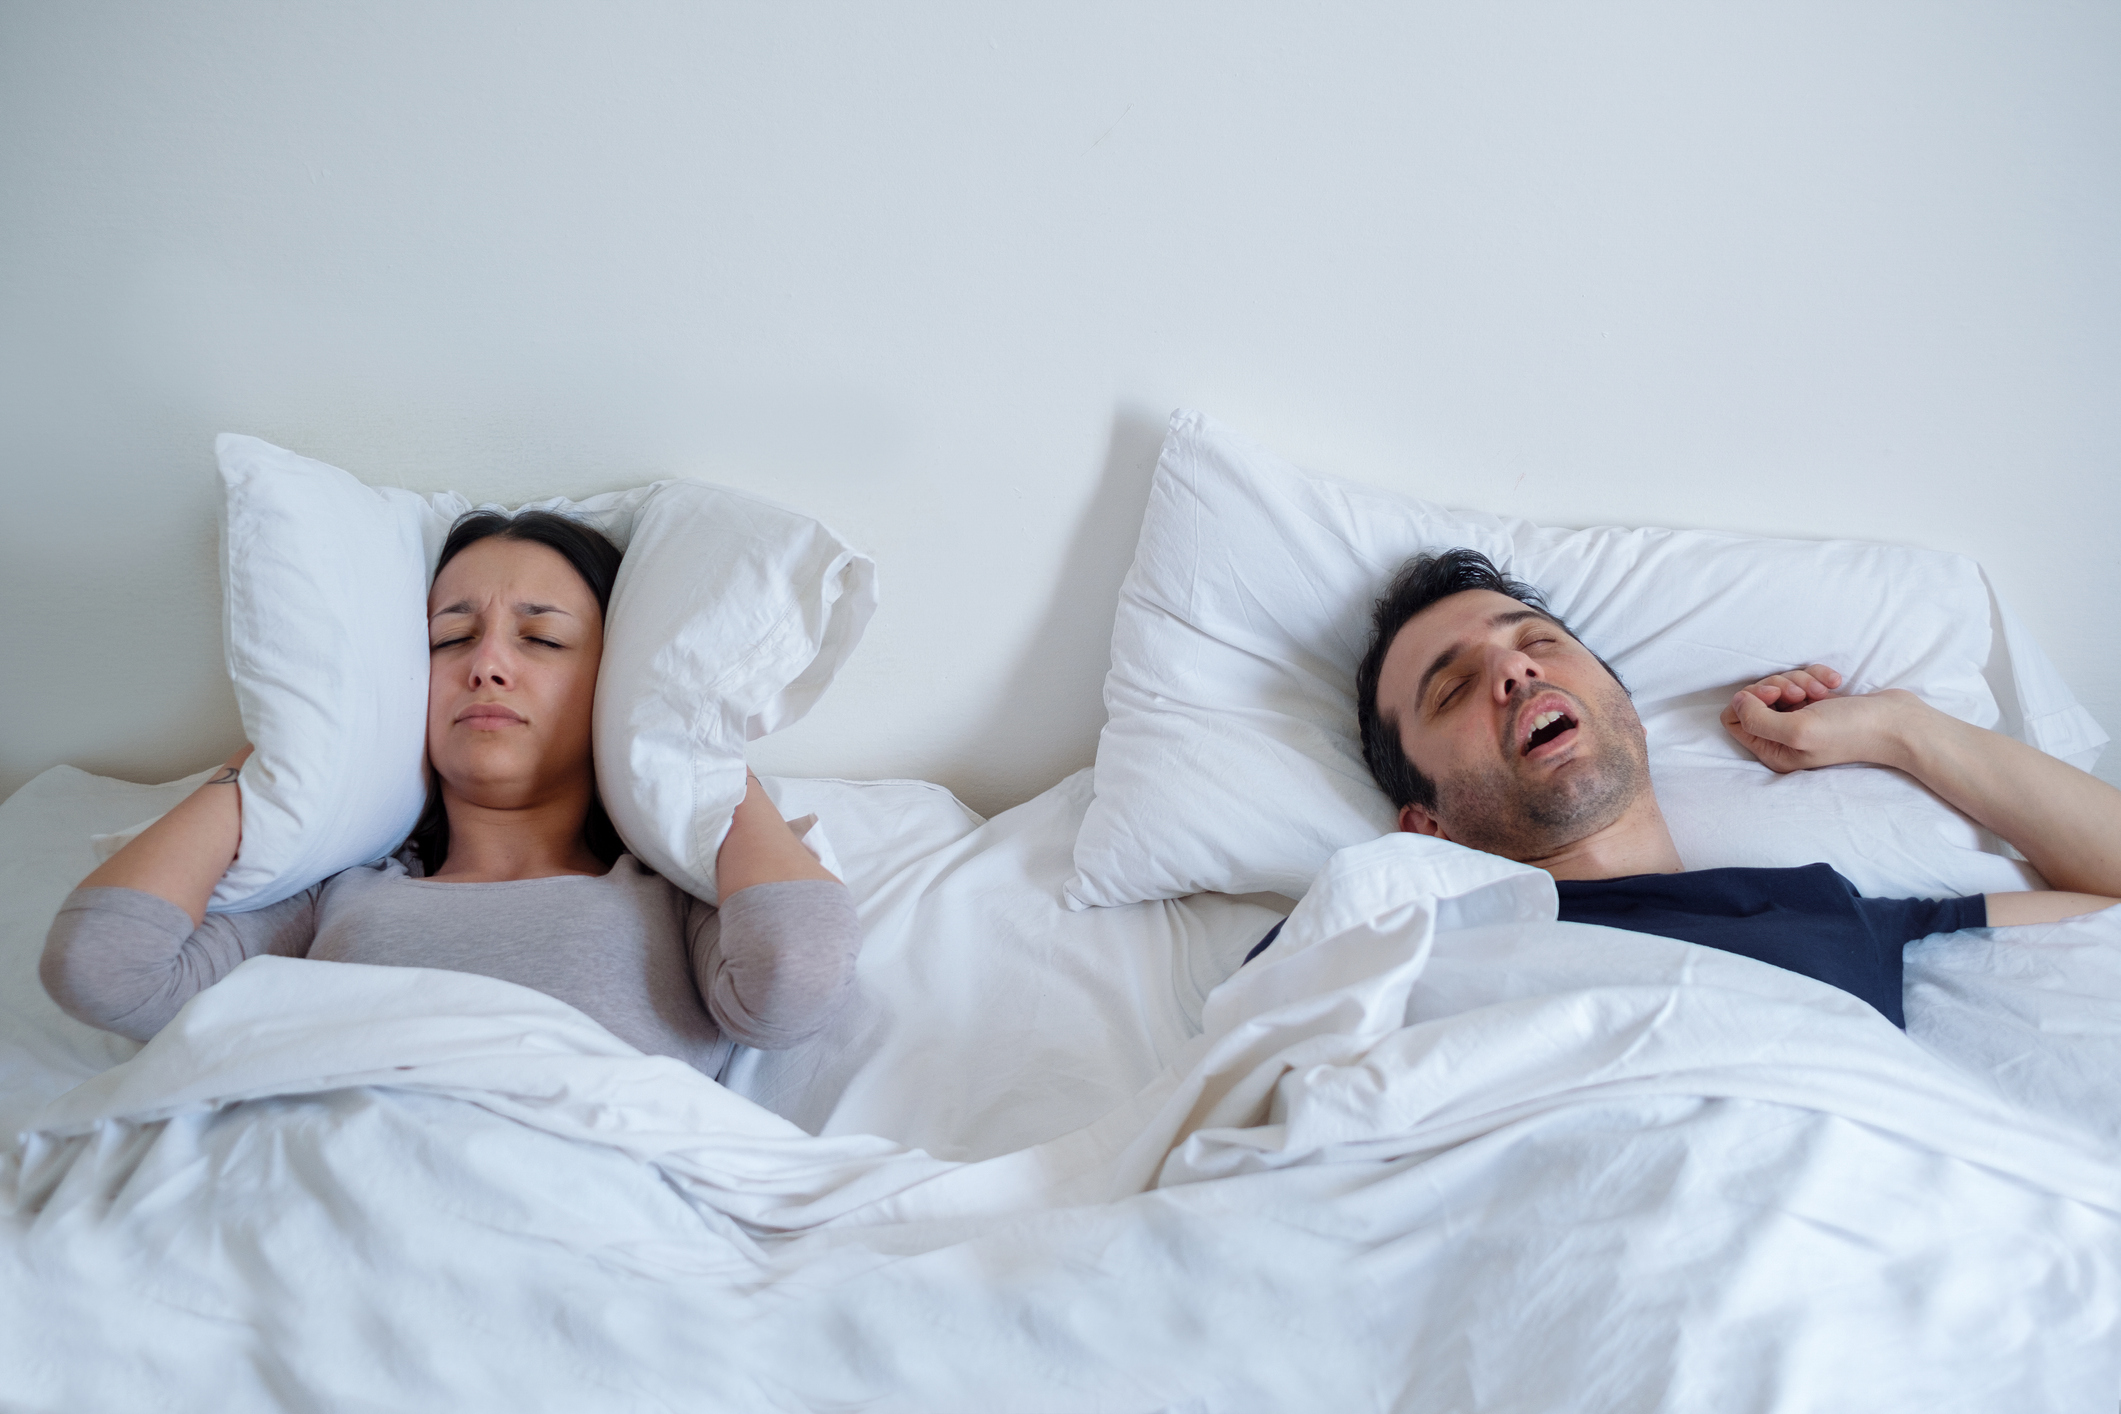 Couple in bed with the woman holding a pillow over her ears and a man snoring loudly.